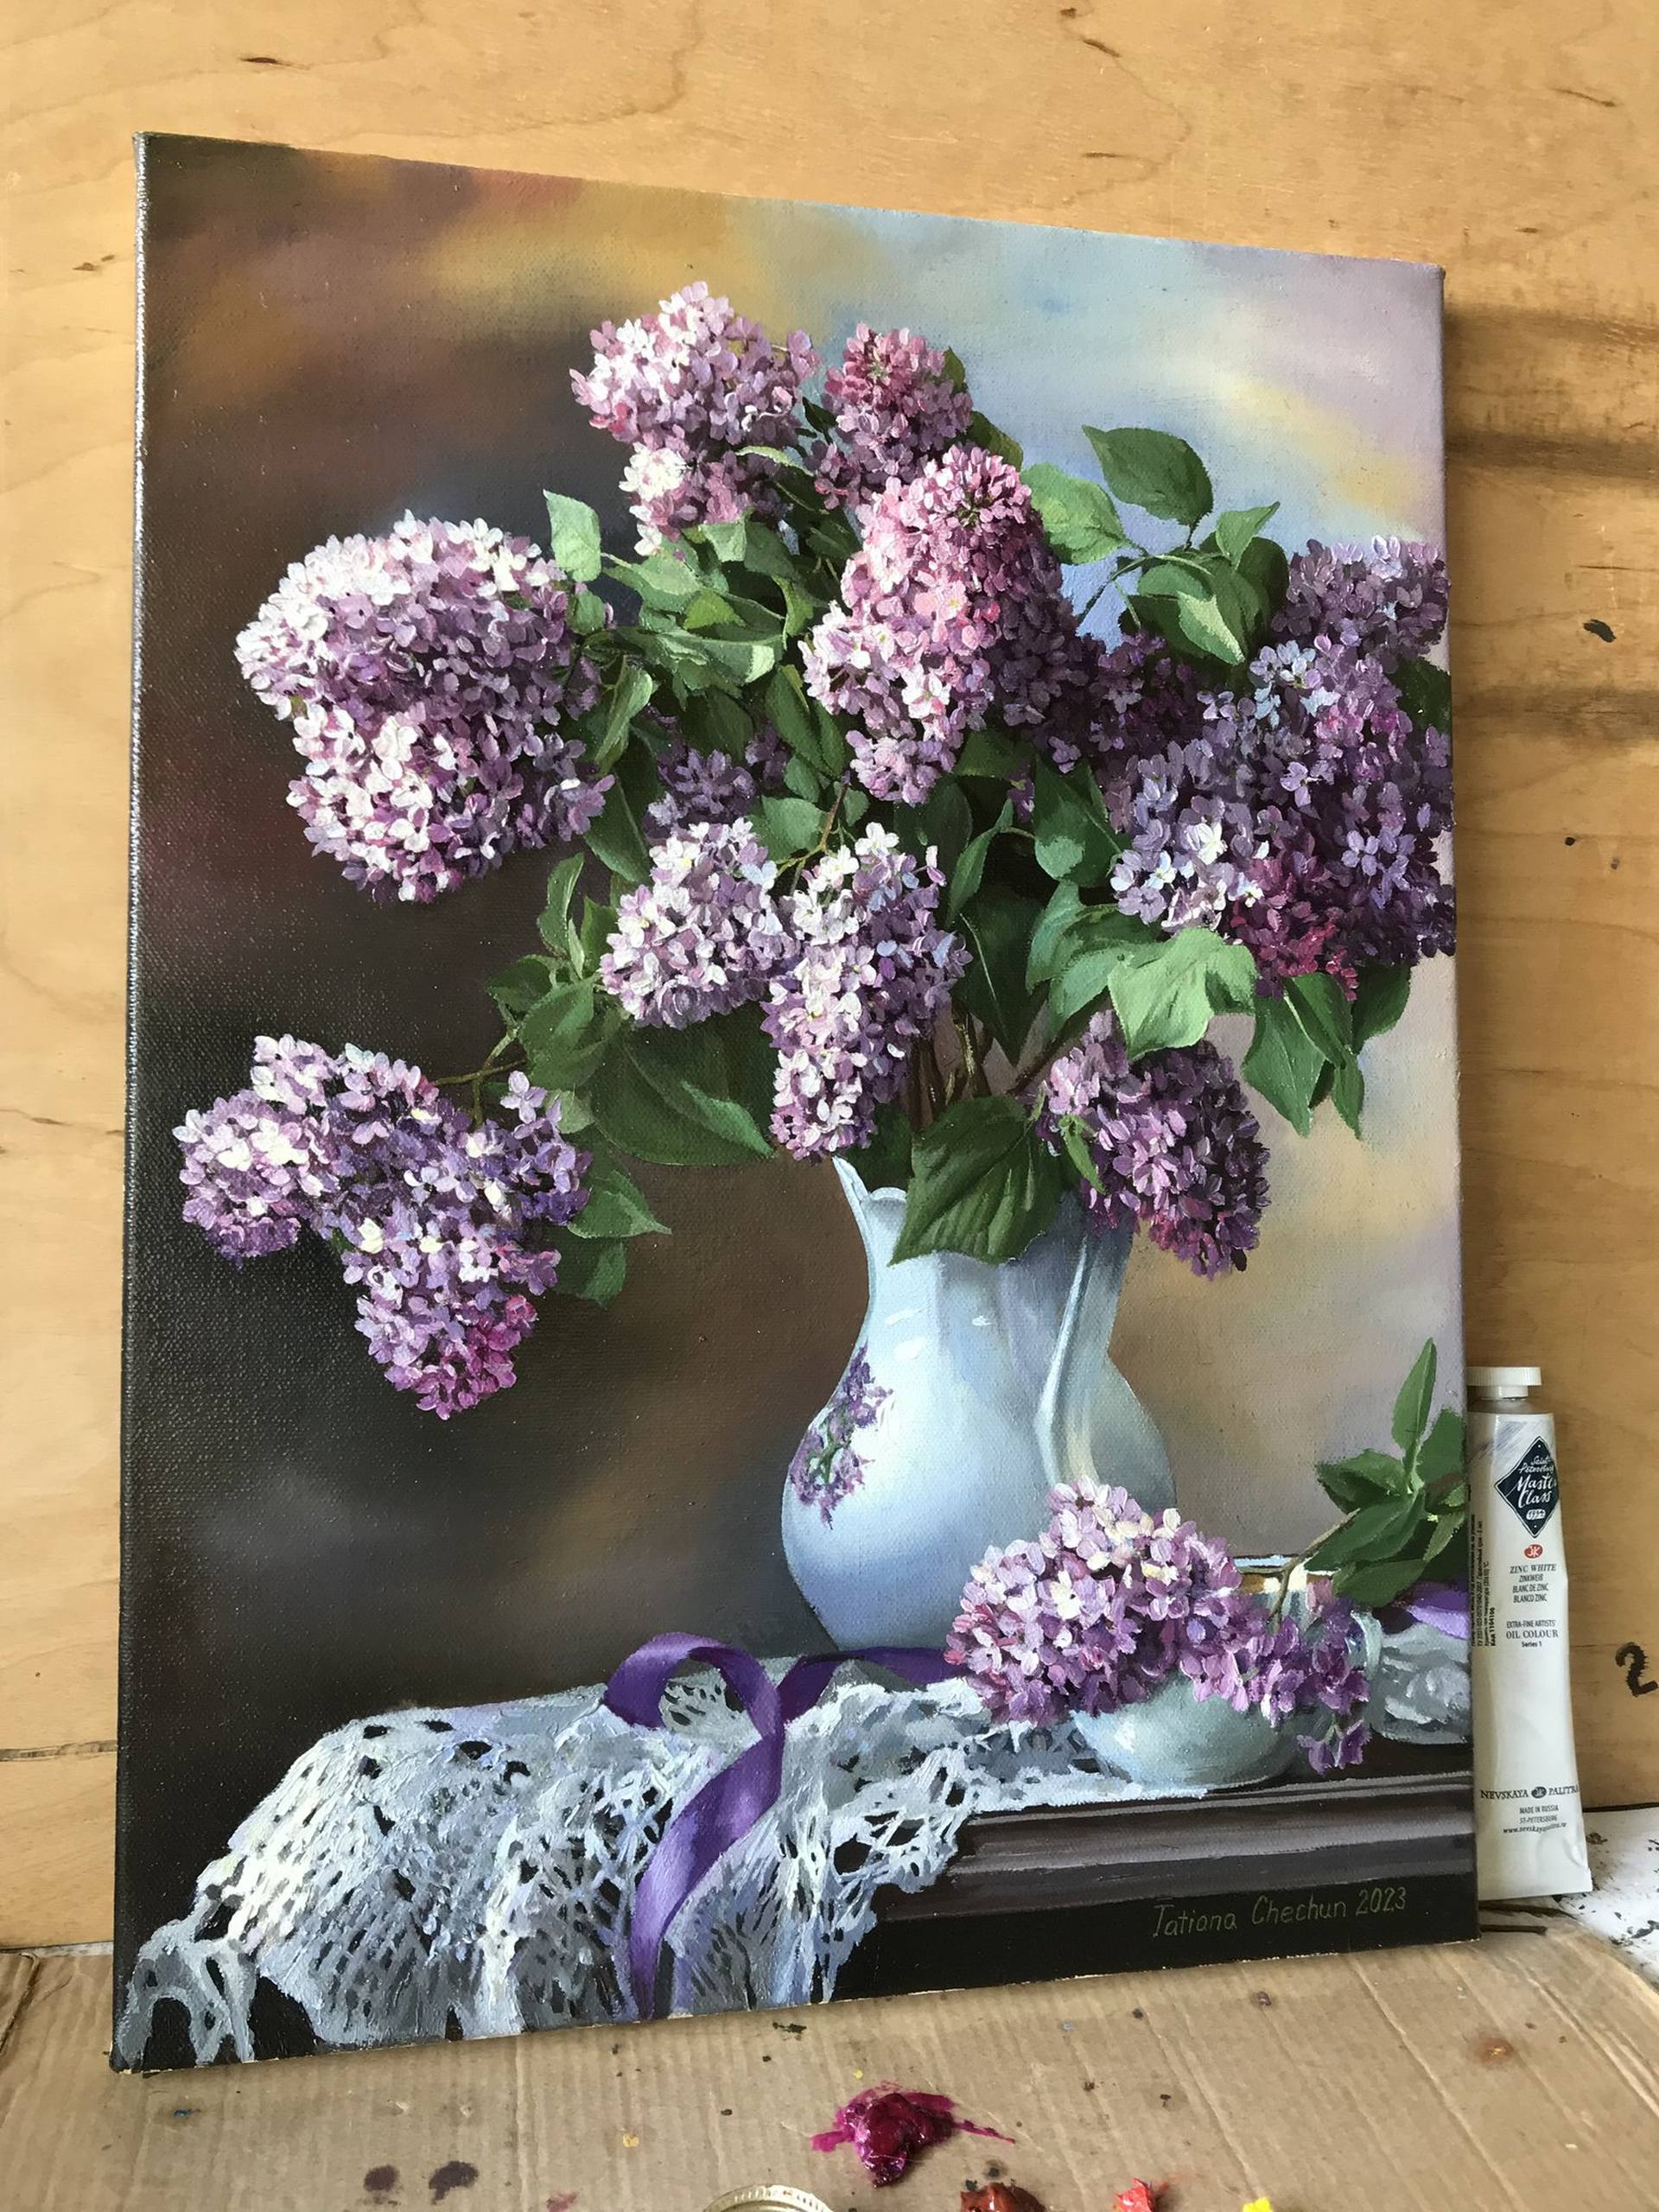 Still Life With Lilac Flowers Photograph by Ustinagreen - Fine Art